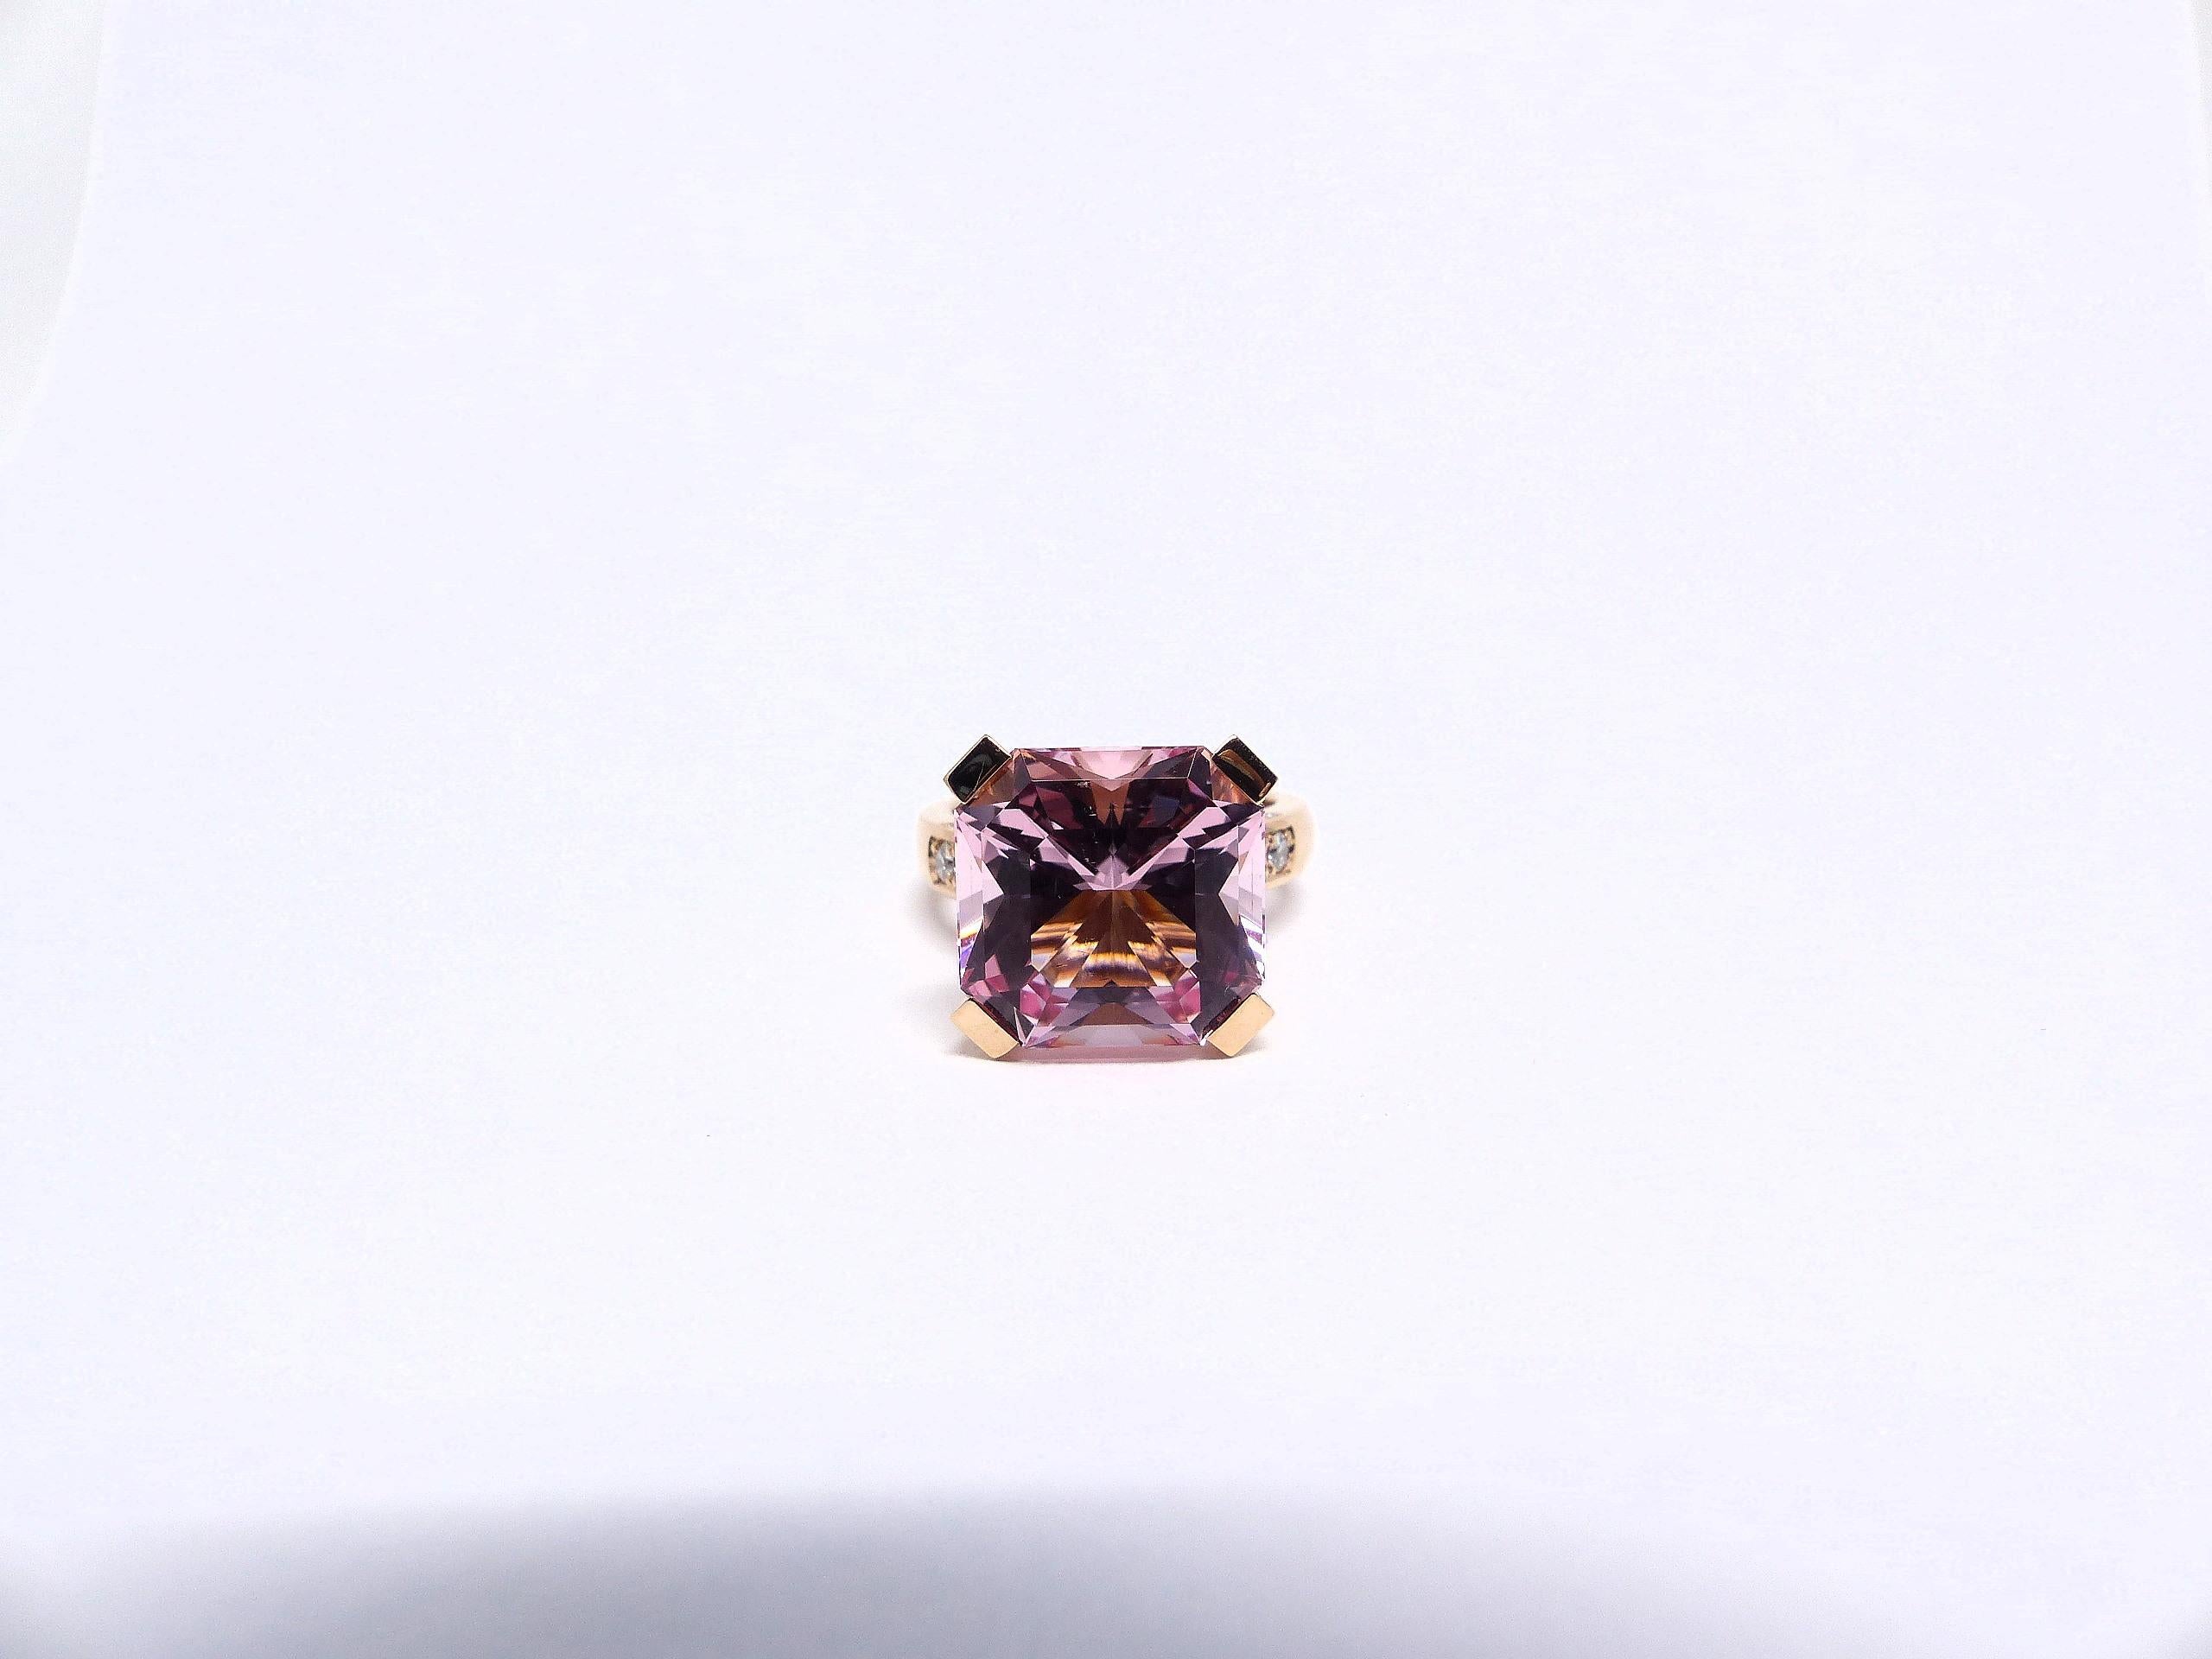 Thomas Leyser is renowned for his contemporary jewellery designs utilizing fine gemstones.

This 18k rose gold ring is set with 1x fine Morganite in intensiv pink colour (radiant cut, octagon, 13x13mm, 8.14 carat) + 26x Diamonds (brilliant-cut,